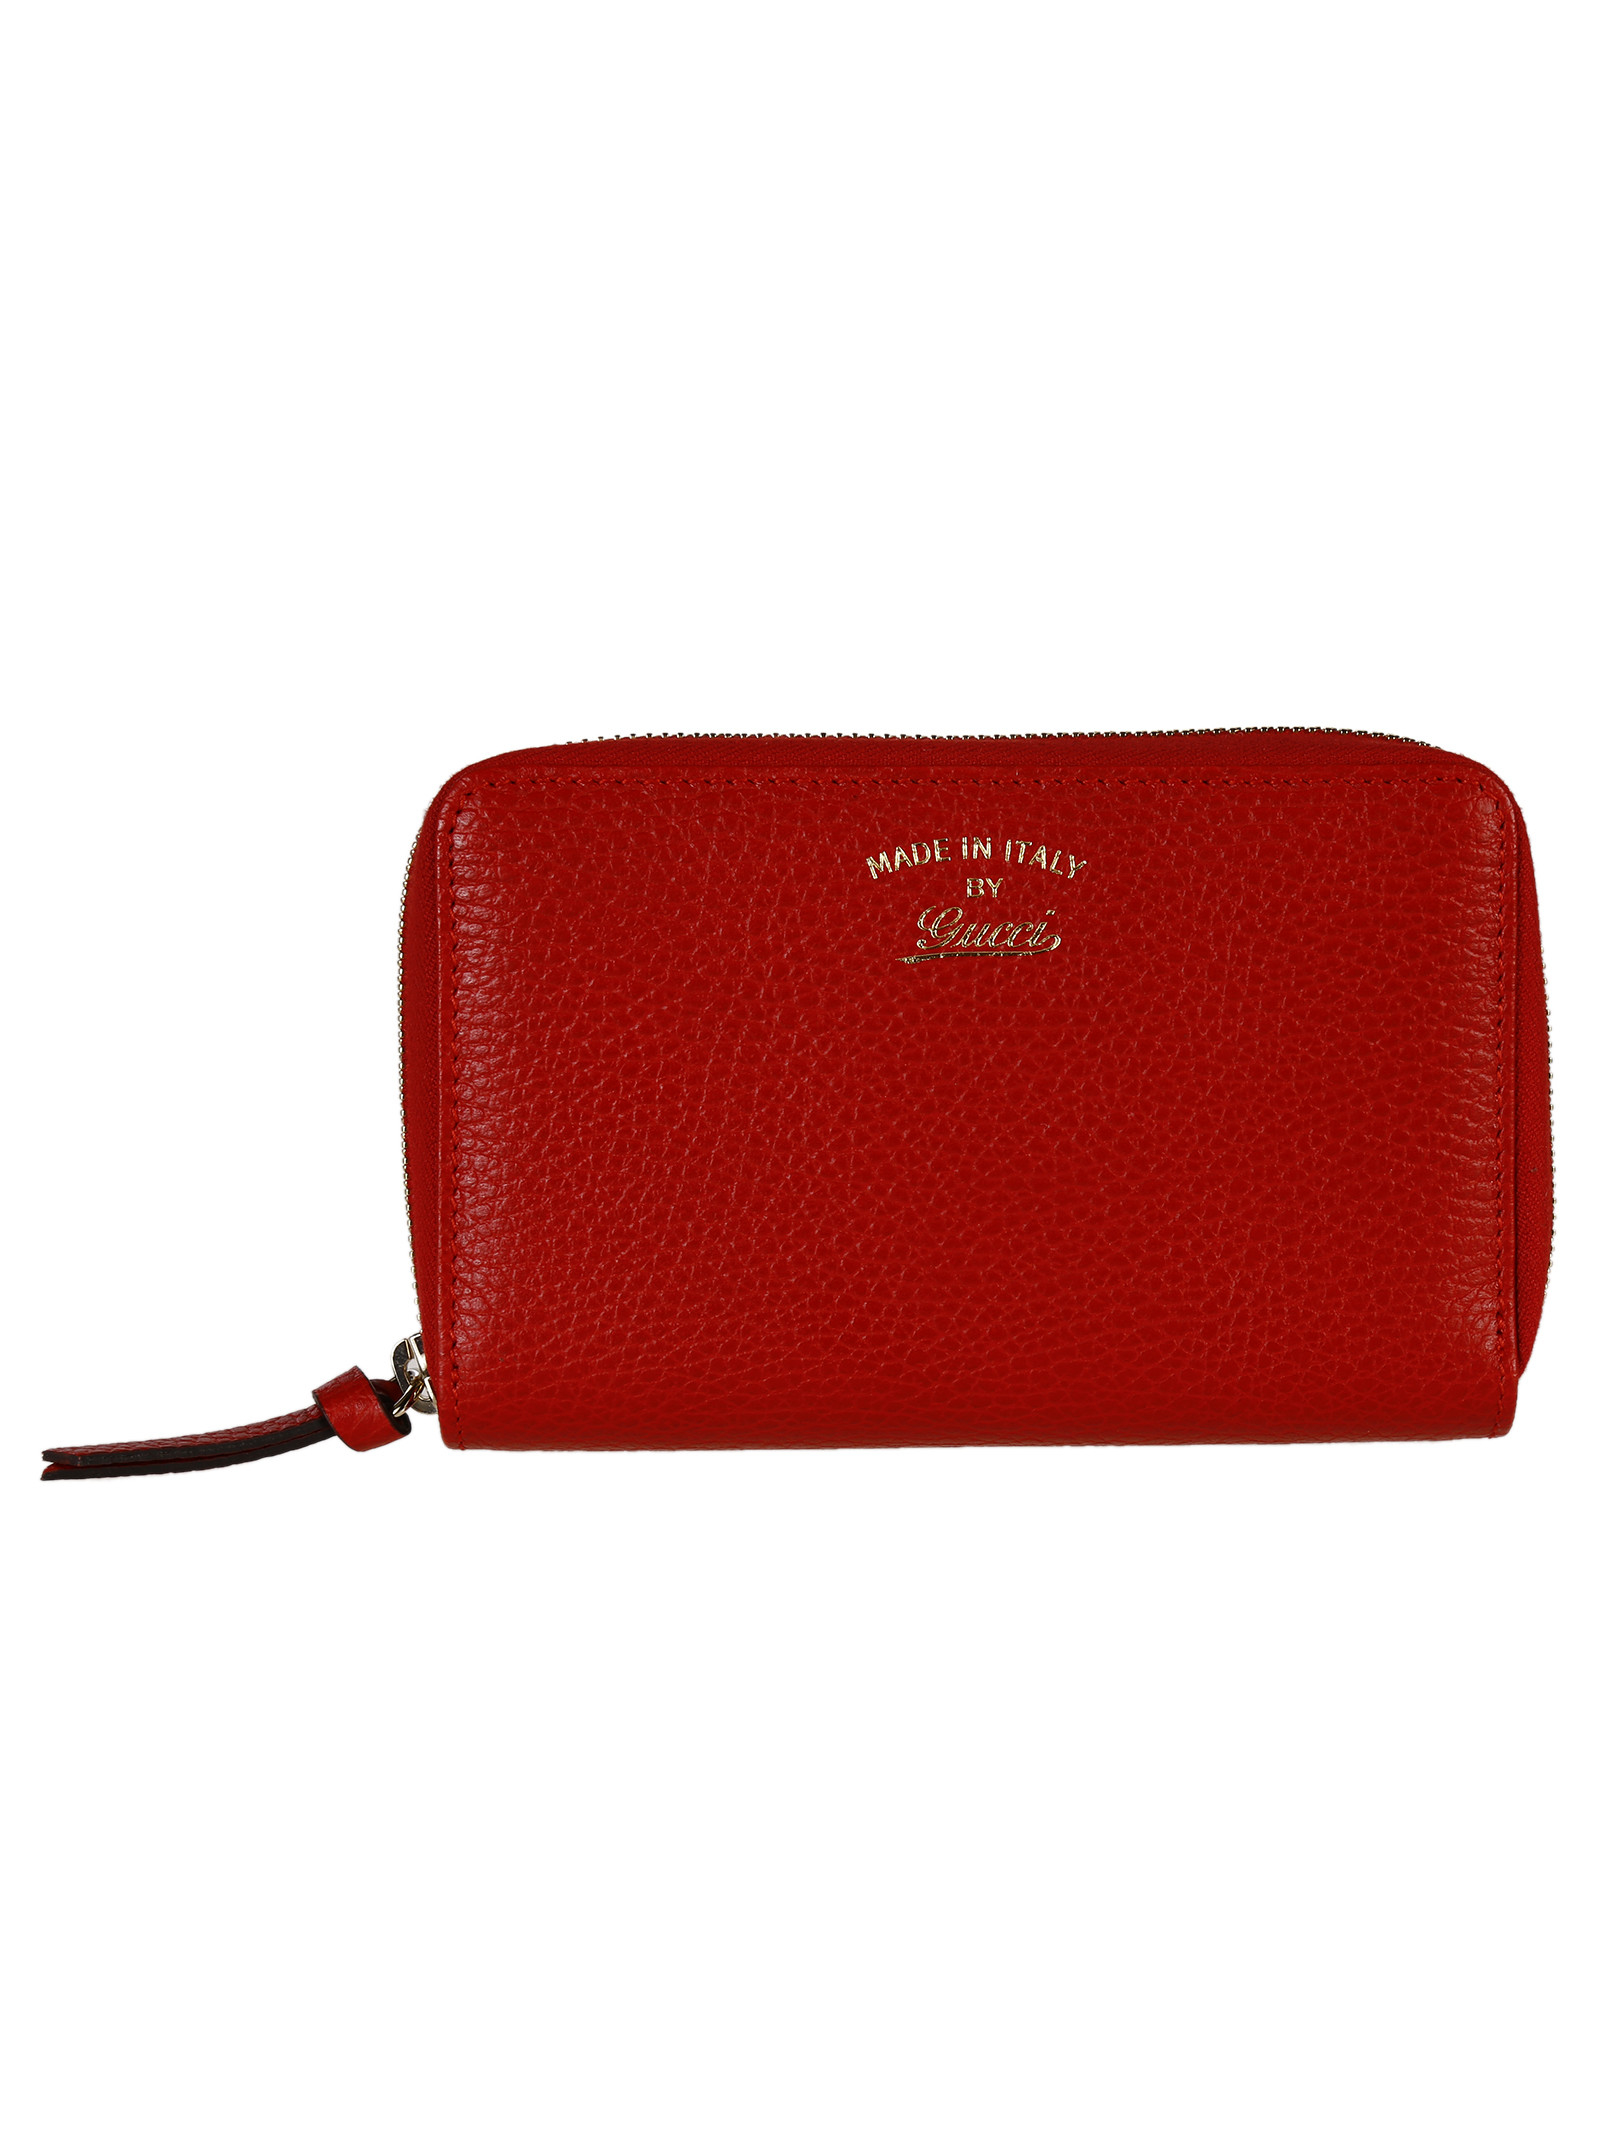 Gucci Leather Zip Around Wallet in Red | Lyst